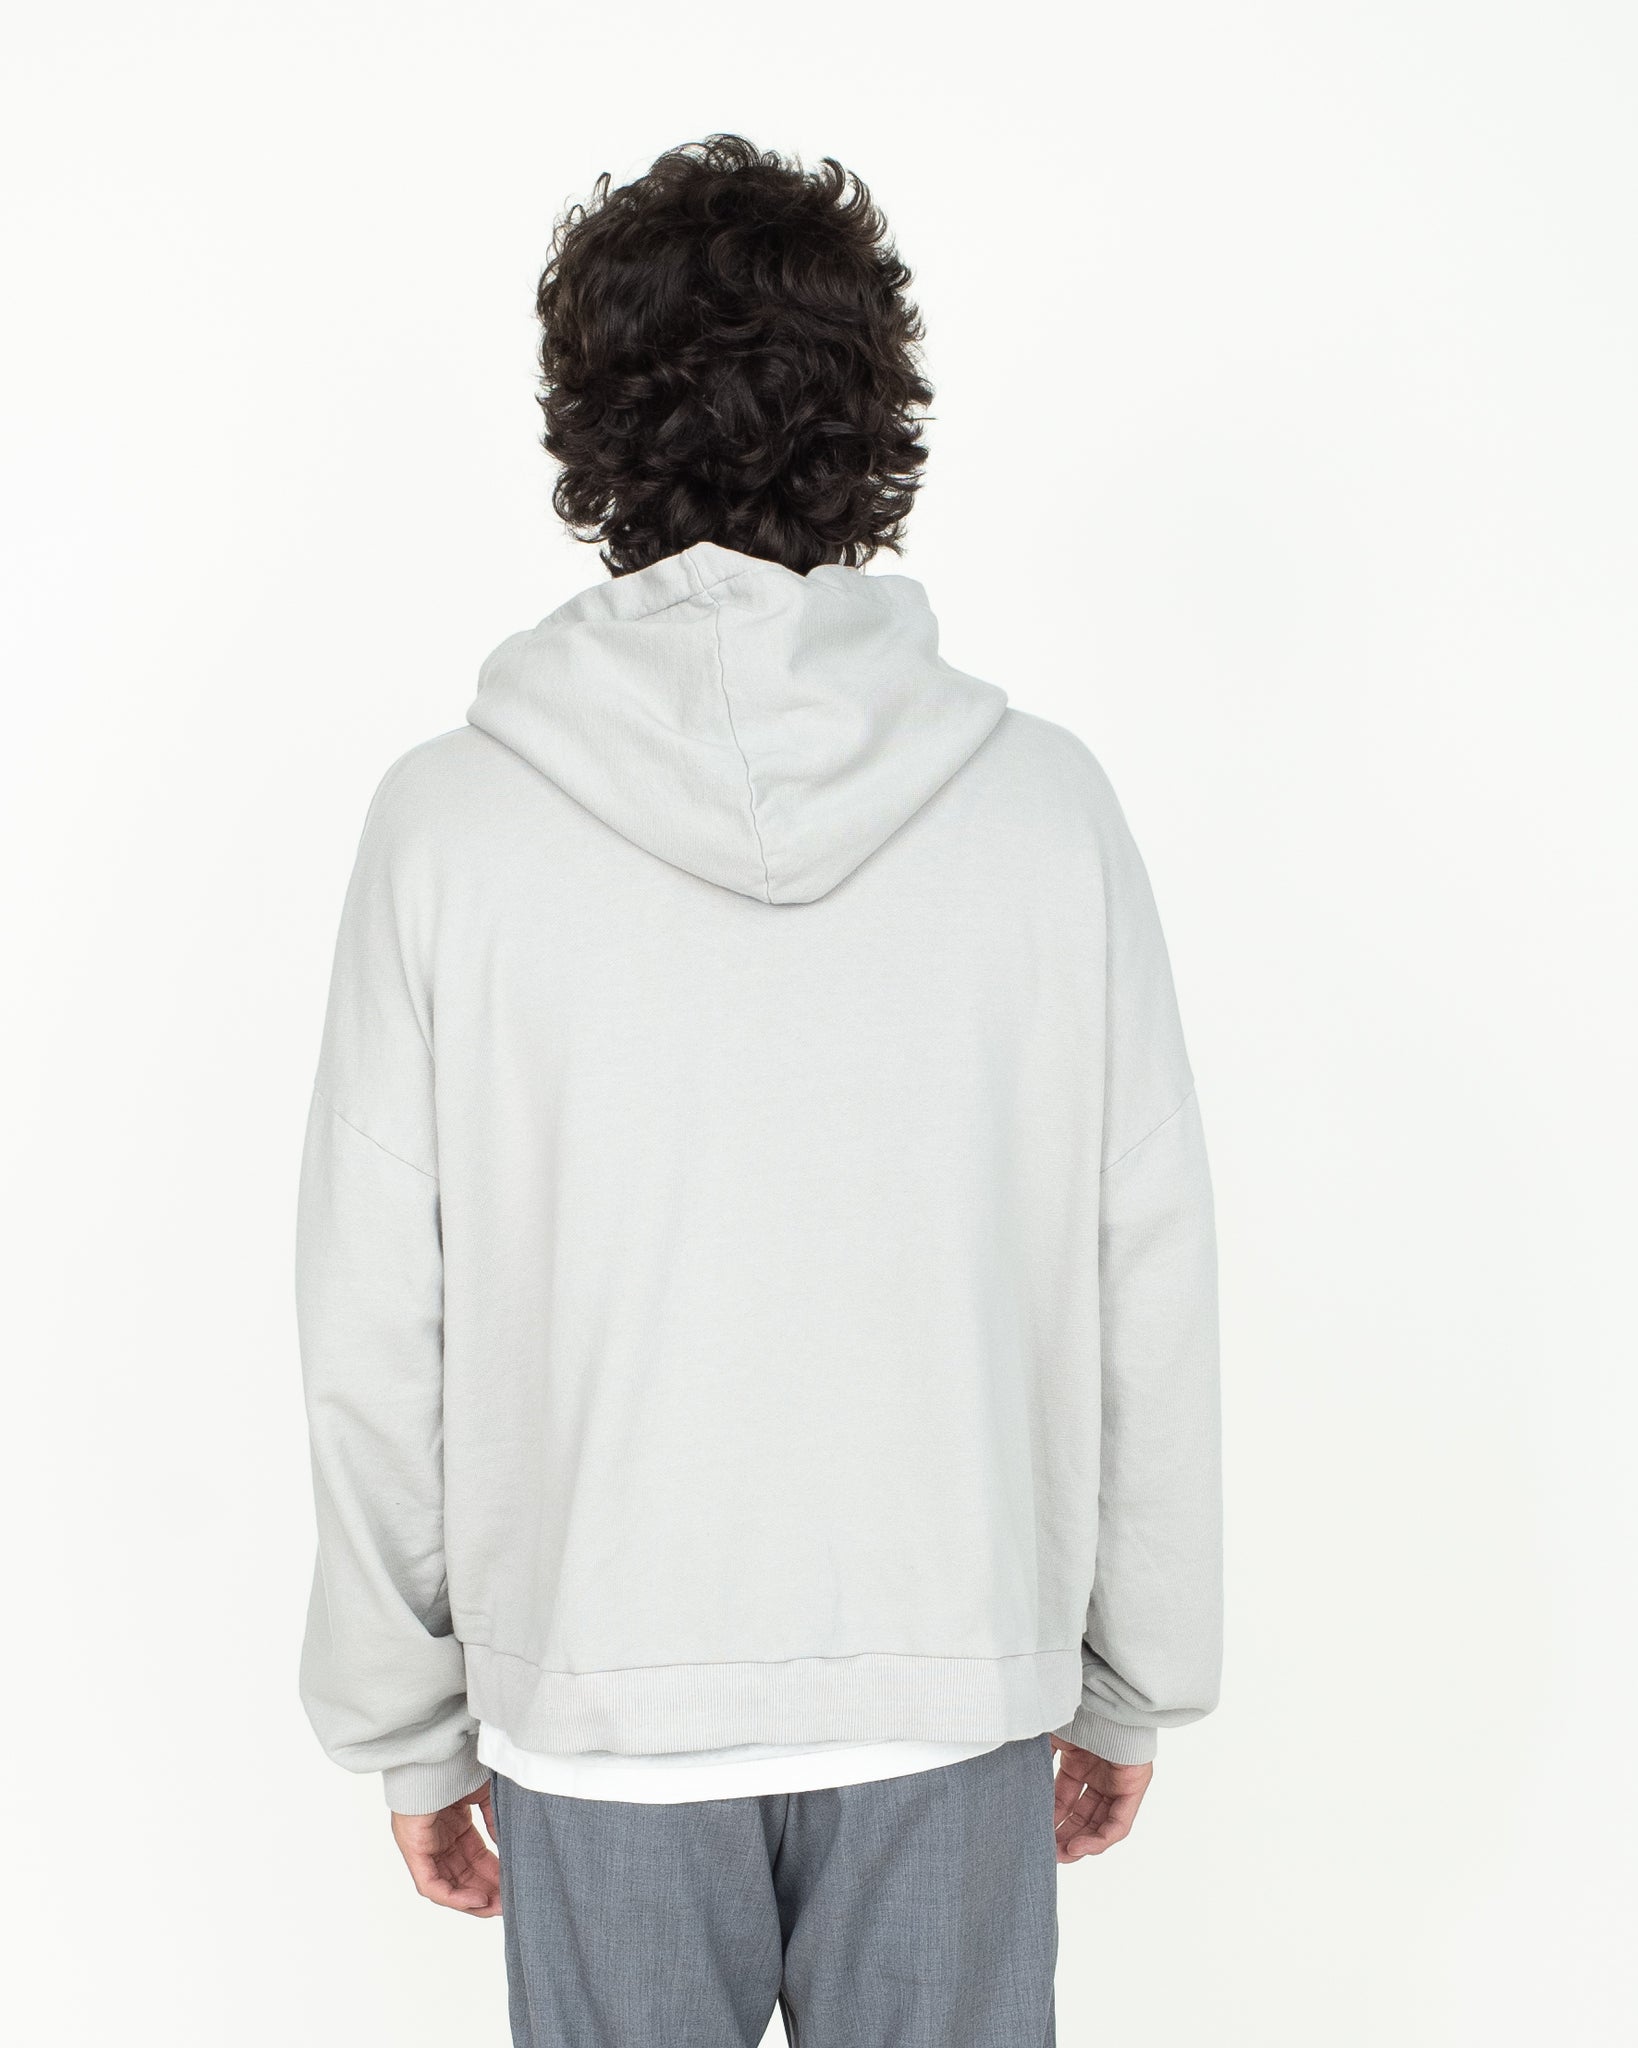 FRENCH TERRY HOODIE "SOWN"